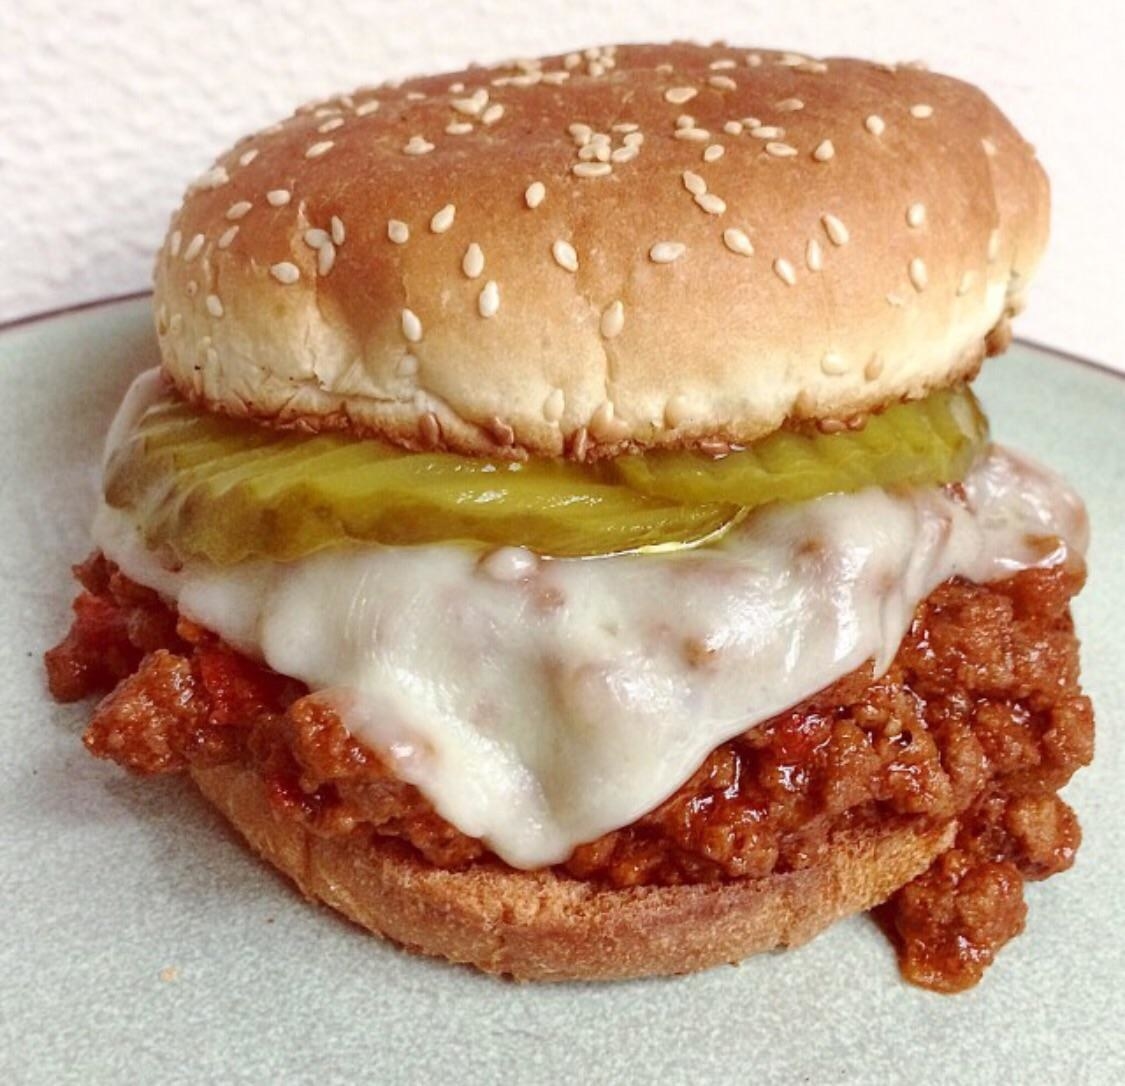 A sloppy Joe with pickles and cheese.